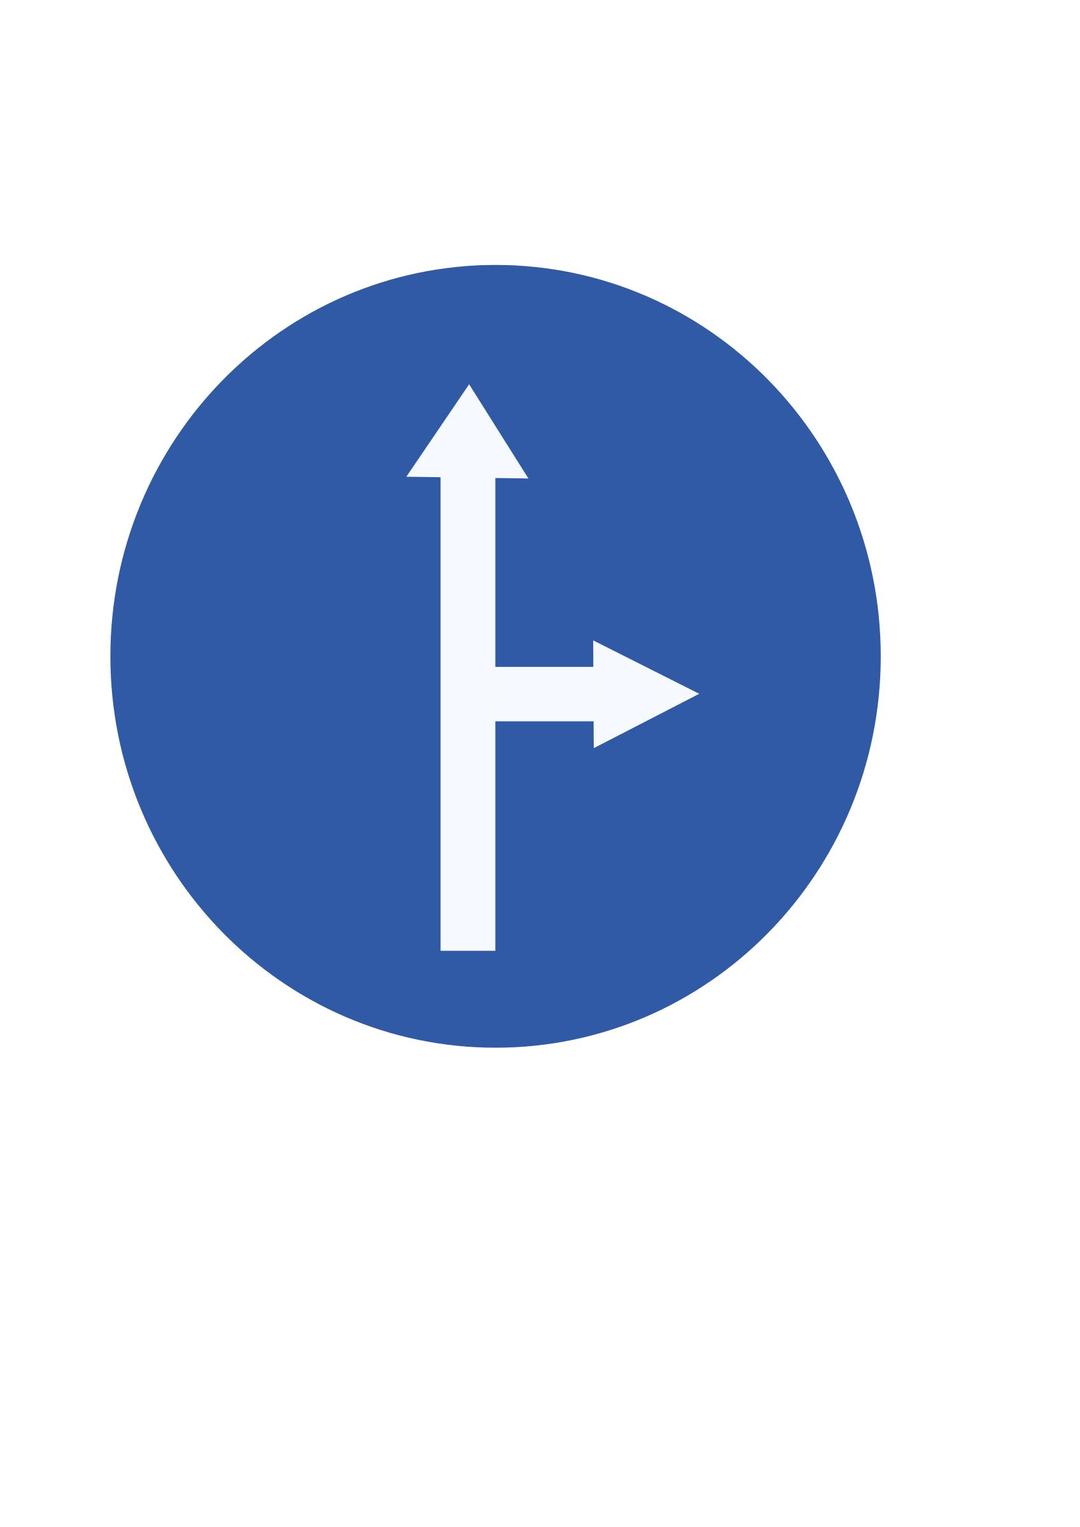 Indian road sign - Ahead or turn right png transparent